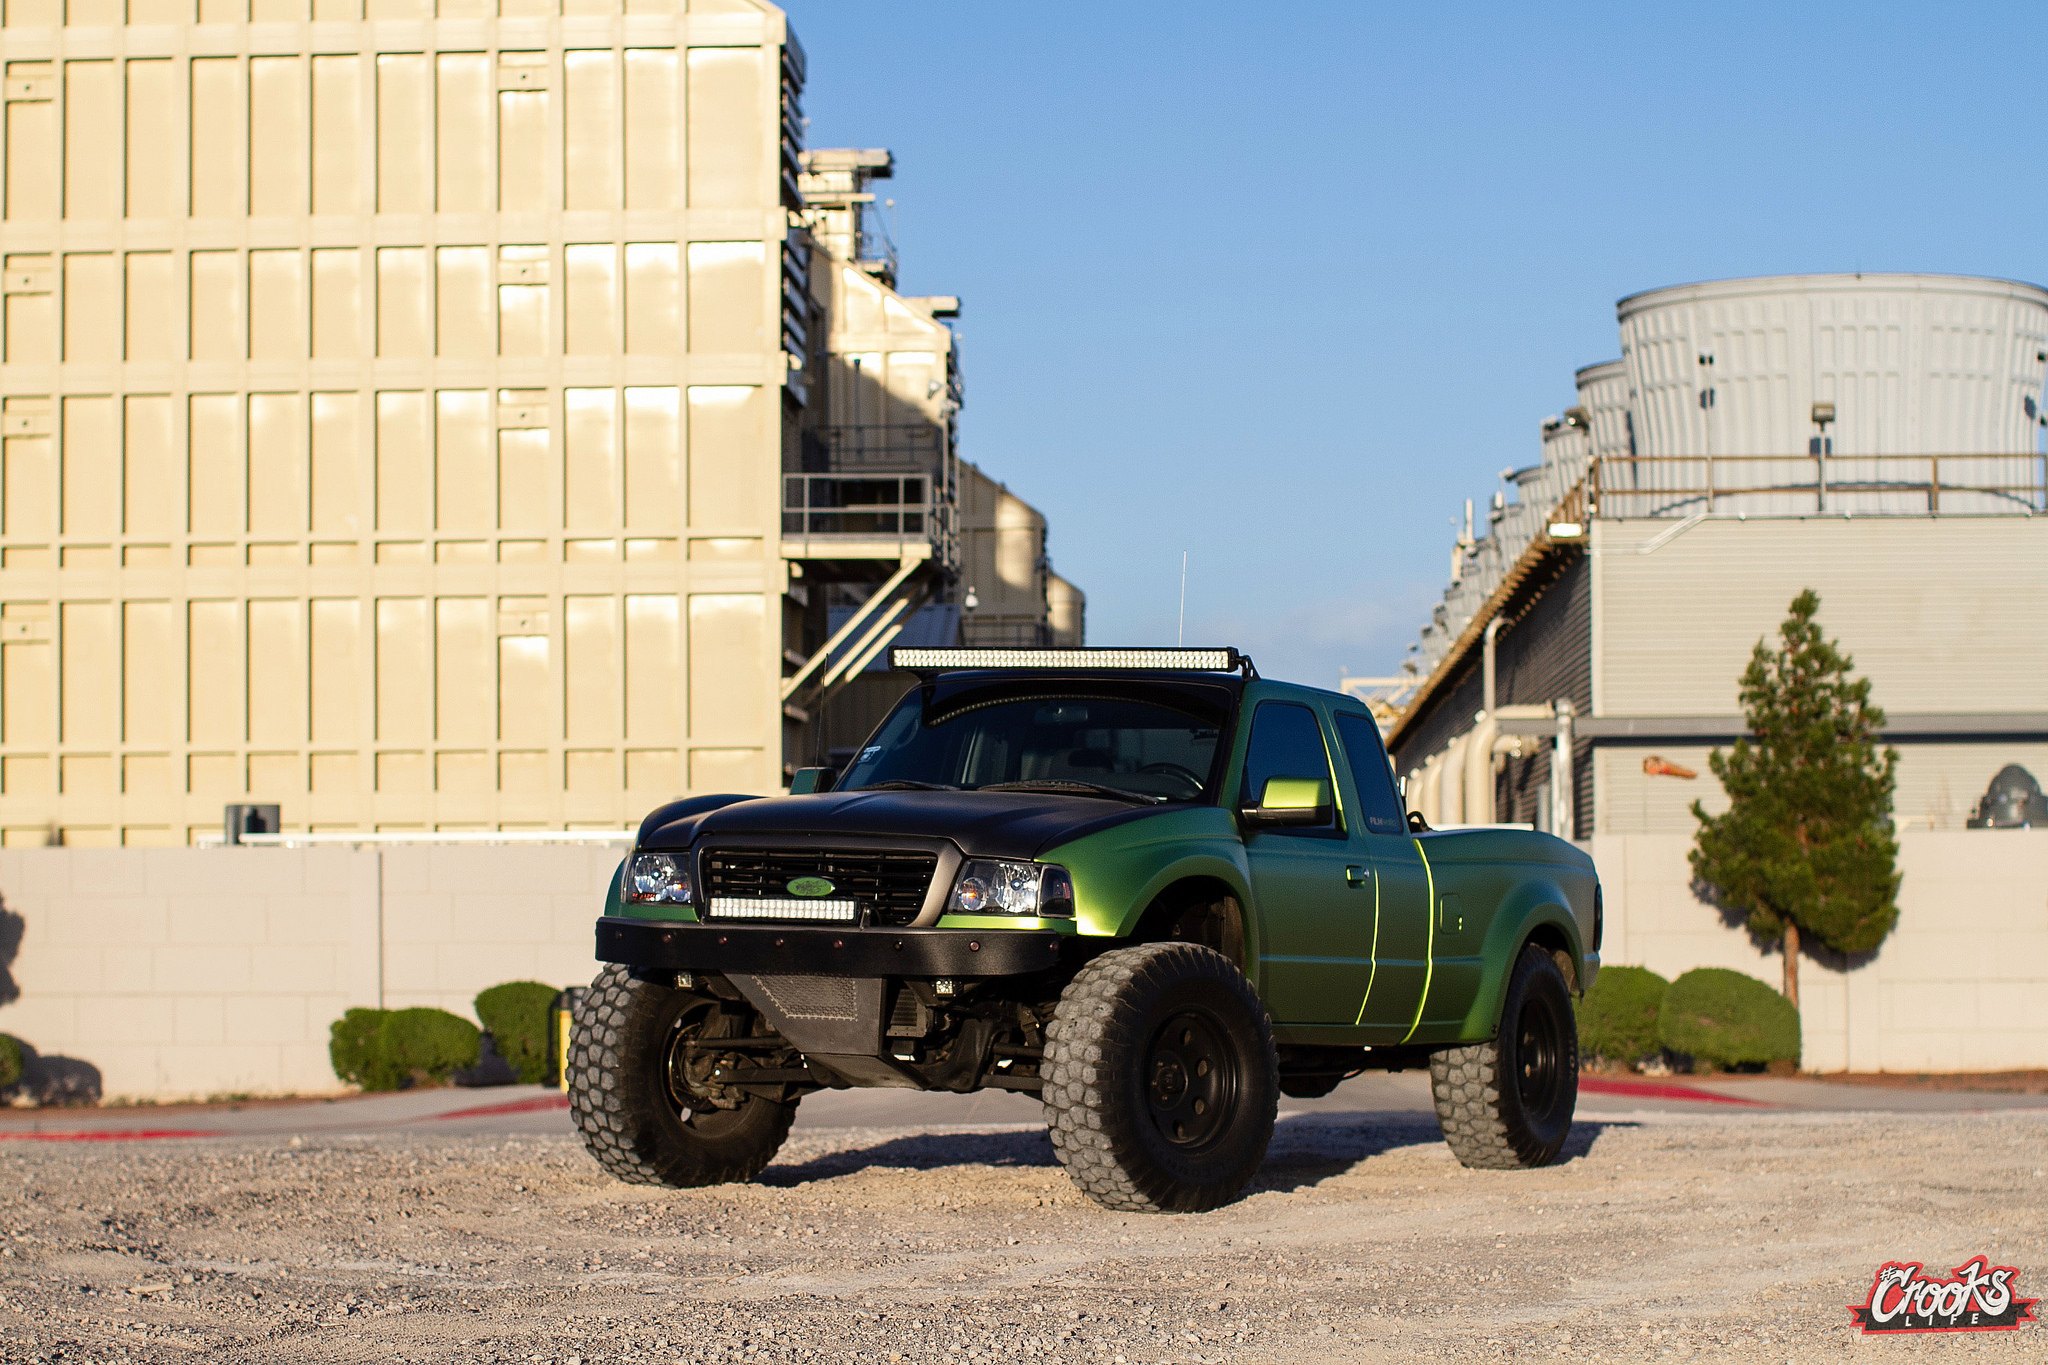 Metallic Green Ford Ranger with Aftermarket Front Bumper - Photo by Jimmy Crook